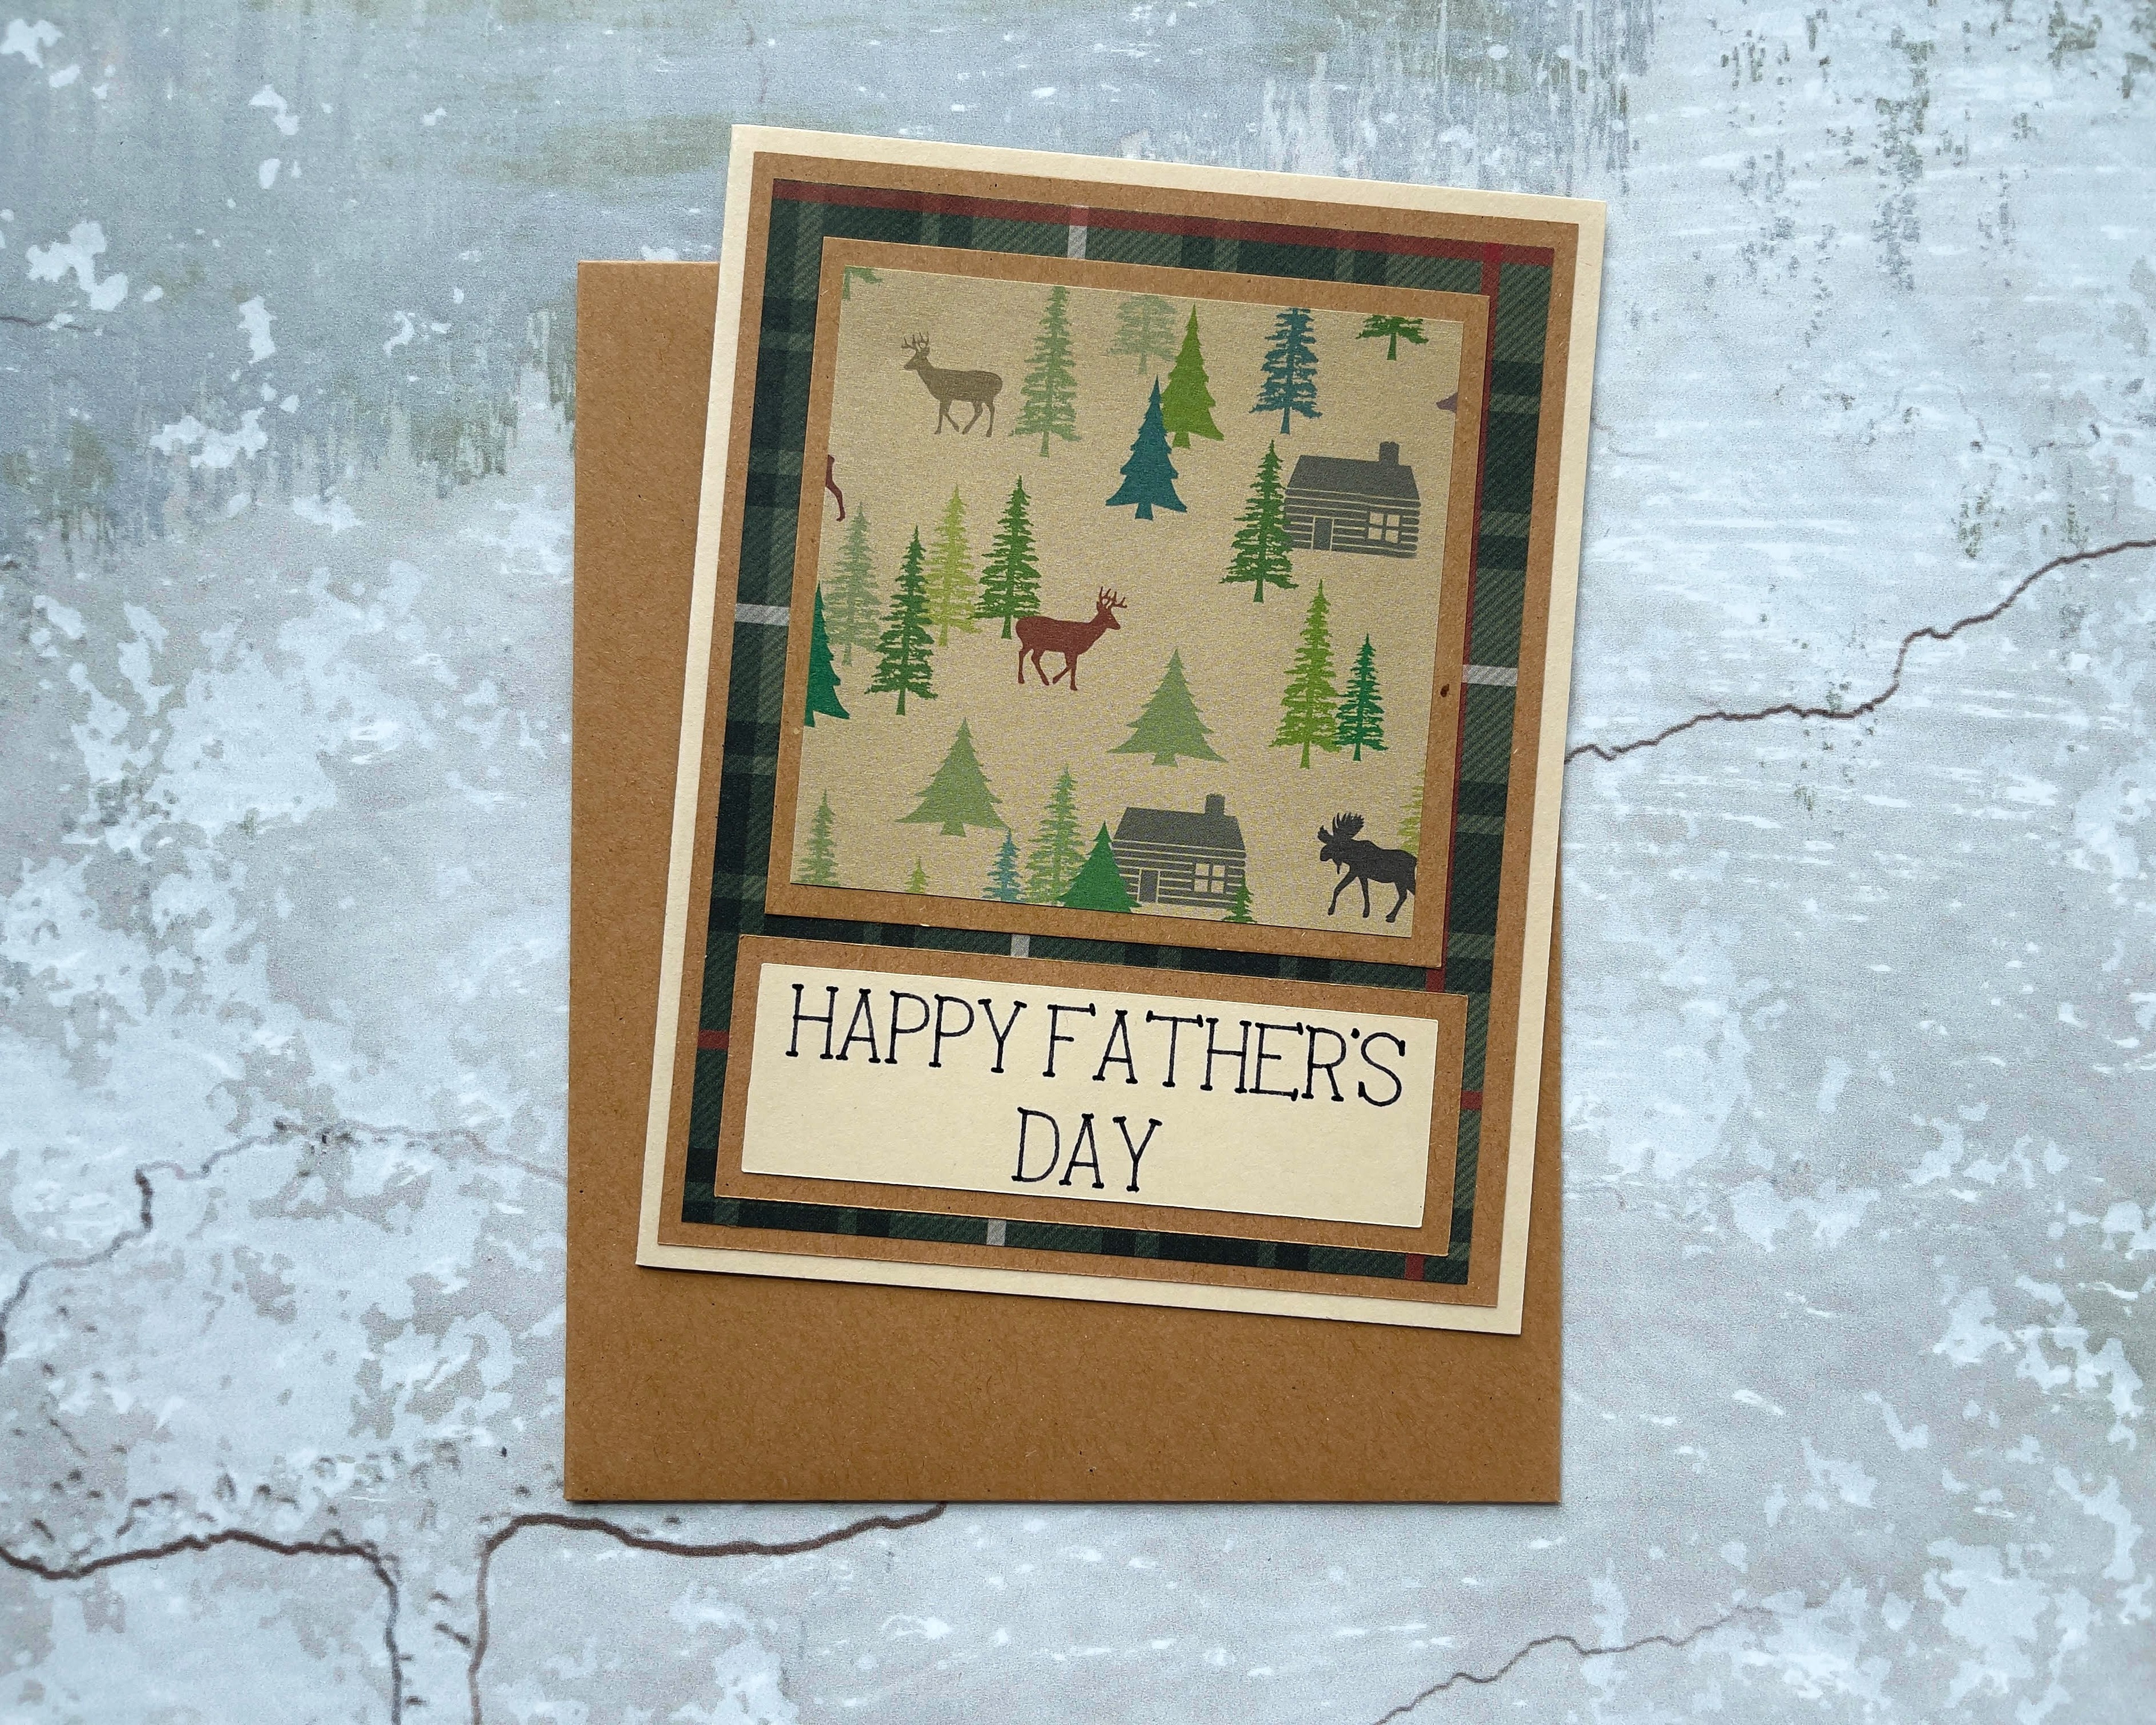 Happy Father's day card depicting a cabin in a forest with deer. 